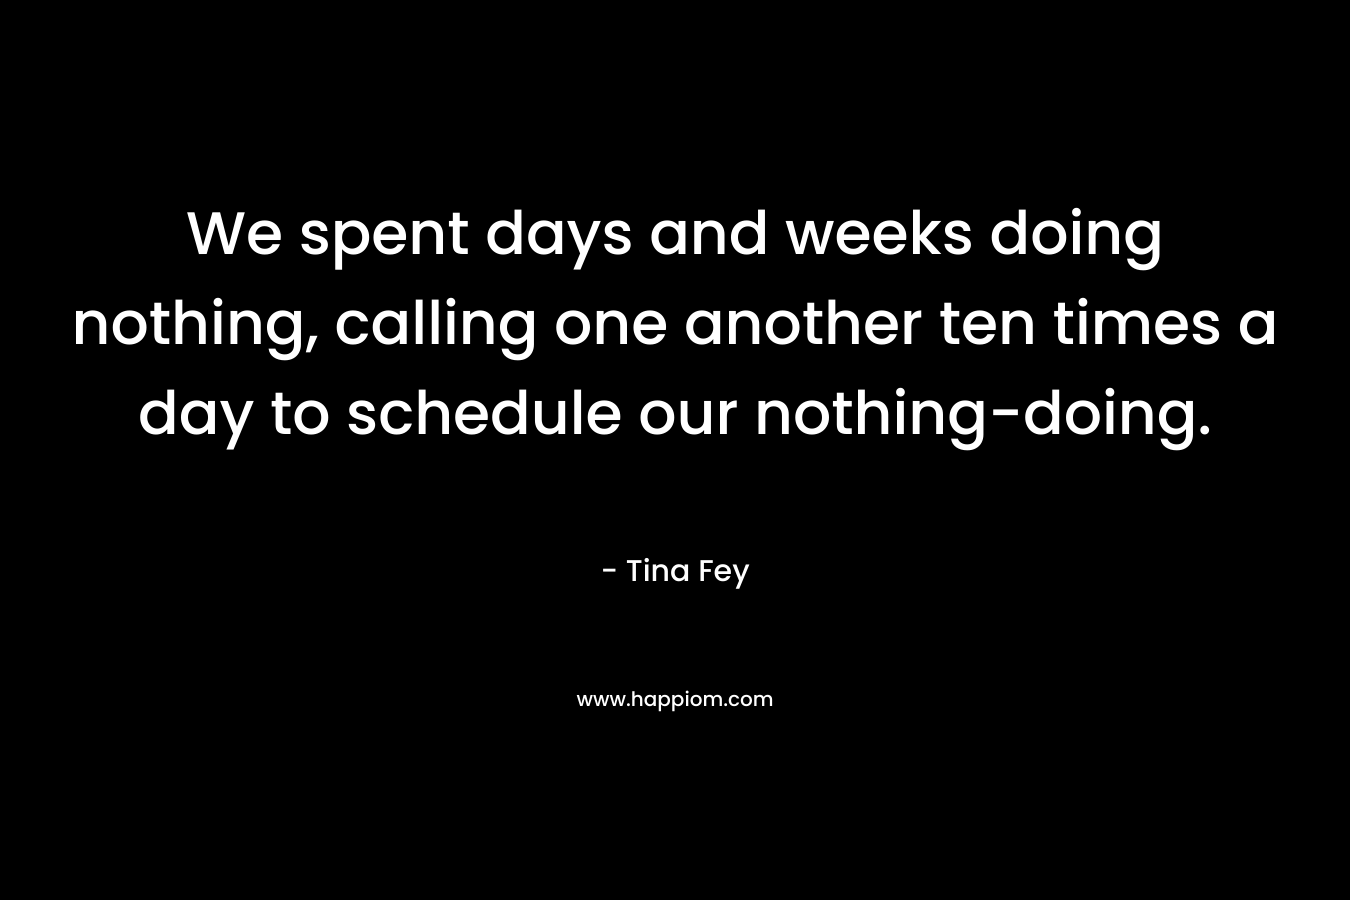 We spent days and weeks doing nothing, calling one another ten times a day to schedule our nothing-doing. – Tina Fey